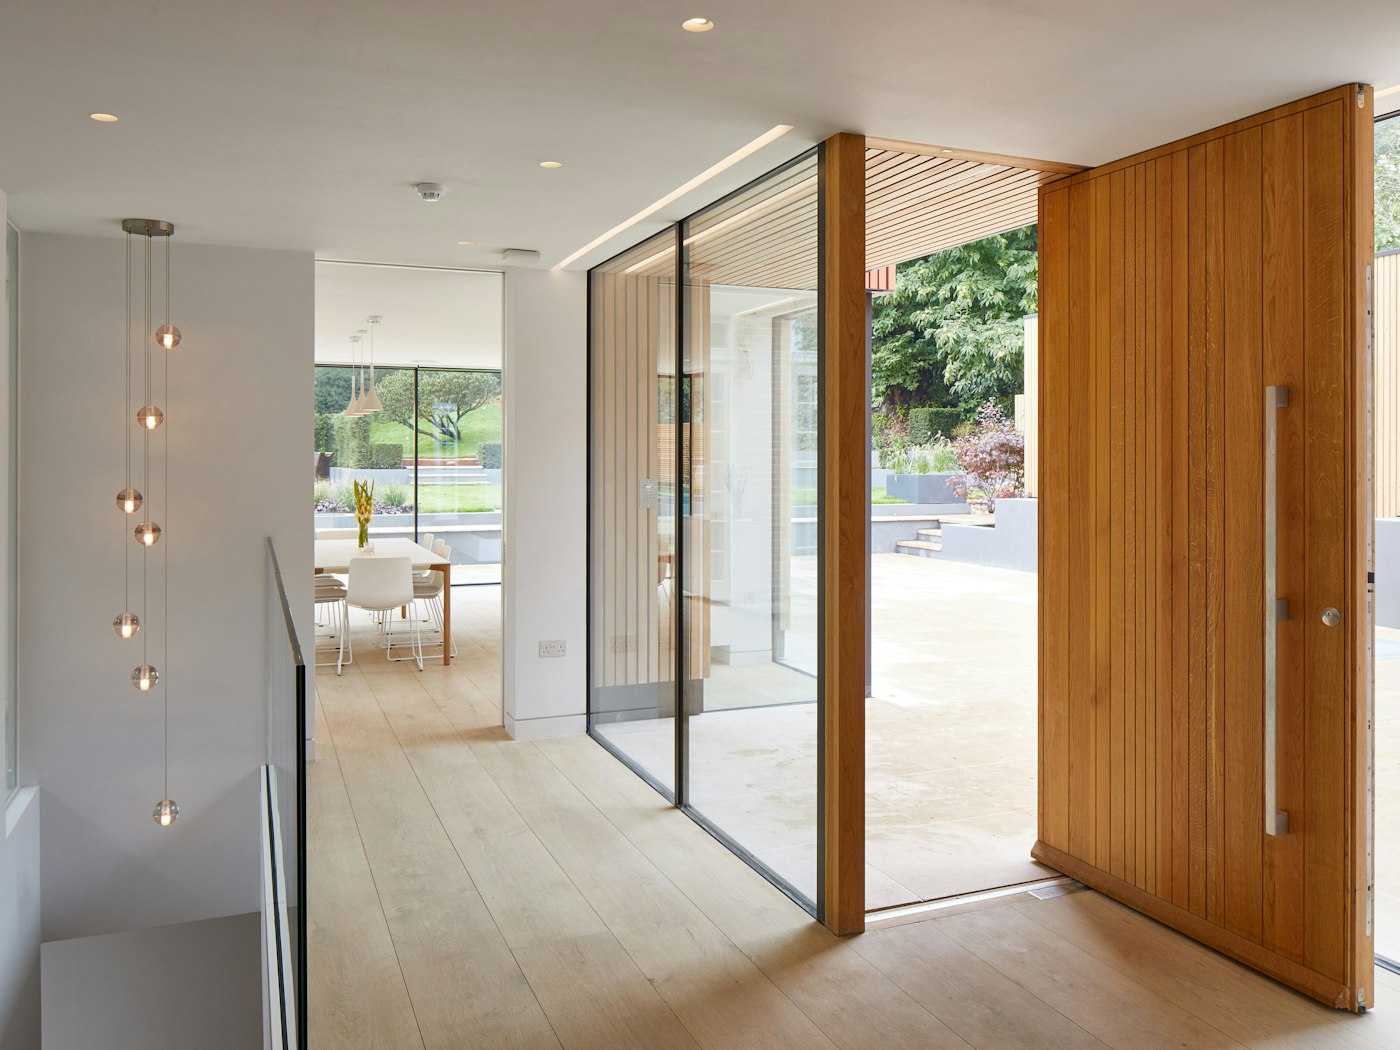 Fitted in glass, this door makes an impressive entrance